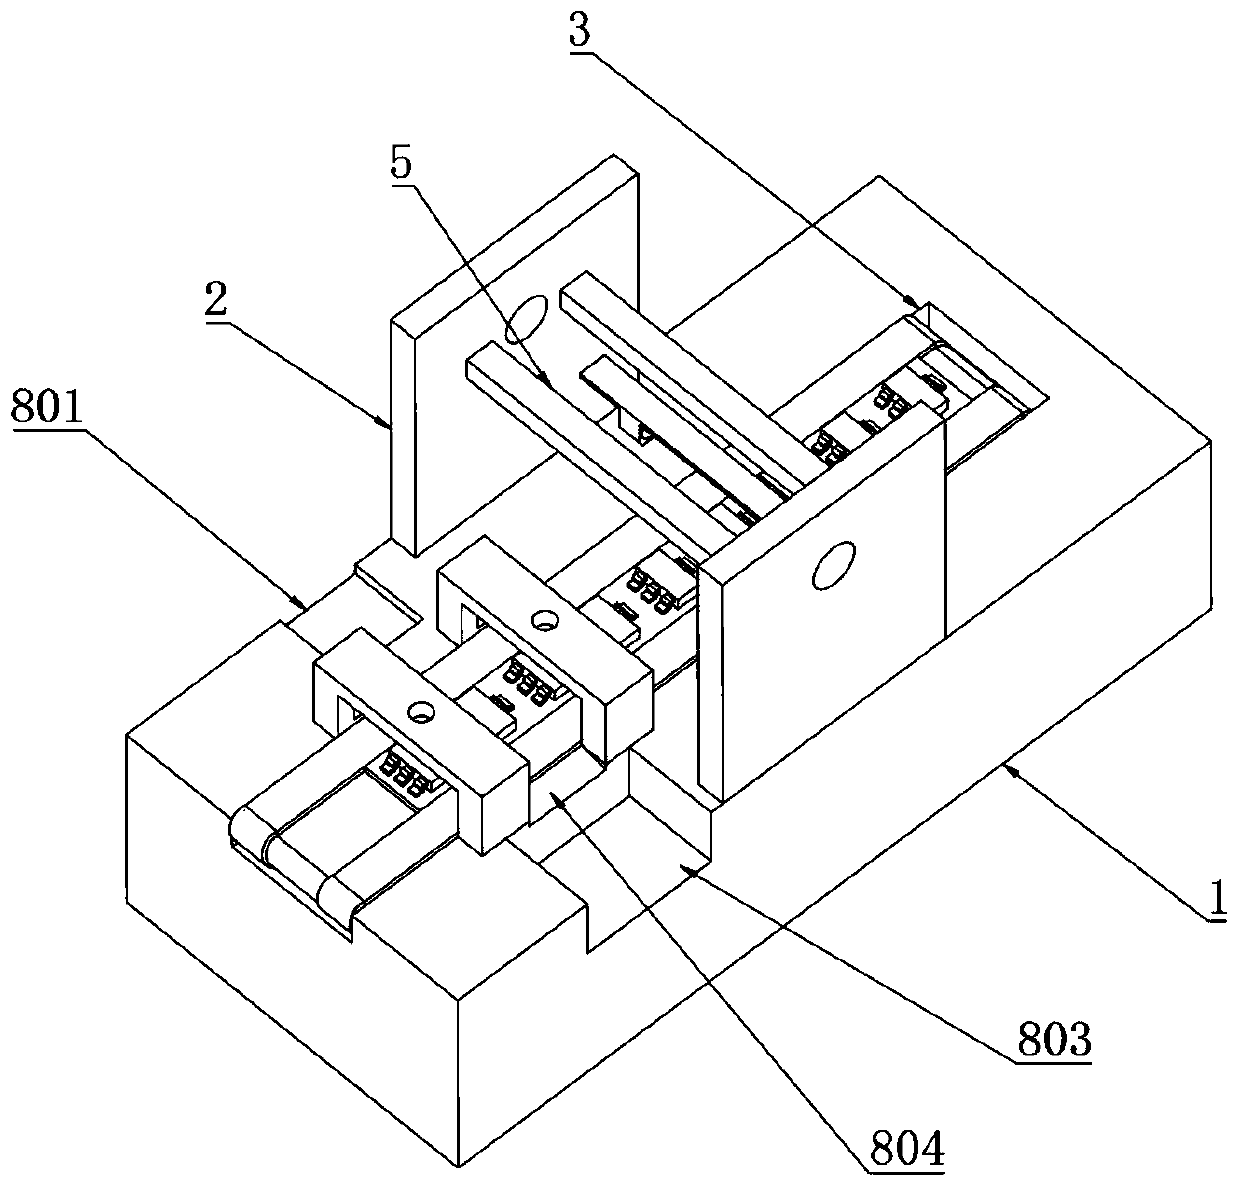 Portable chip removing device capable of screening